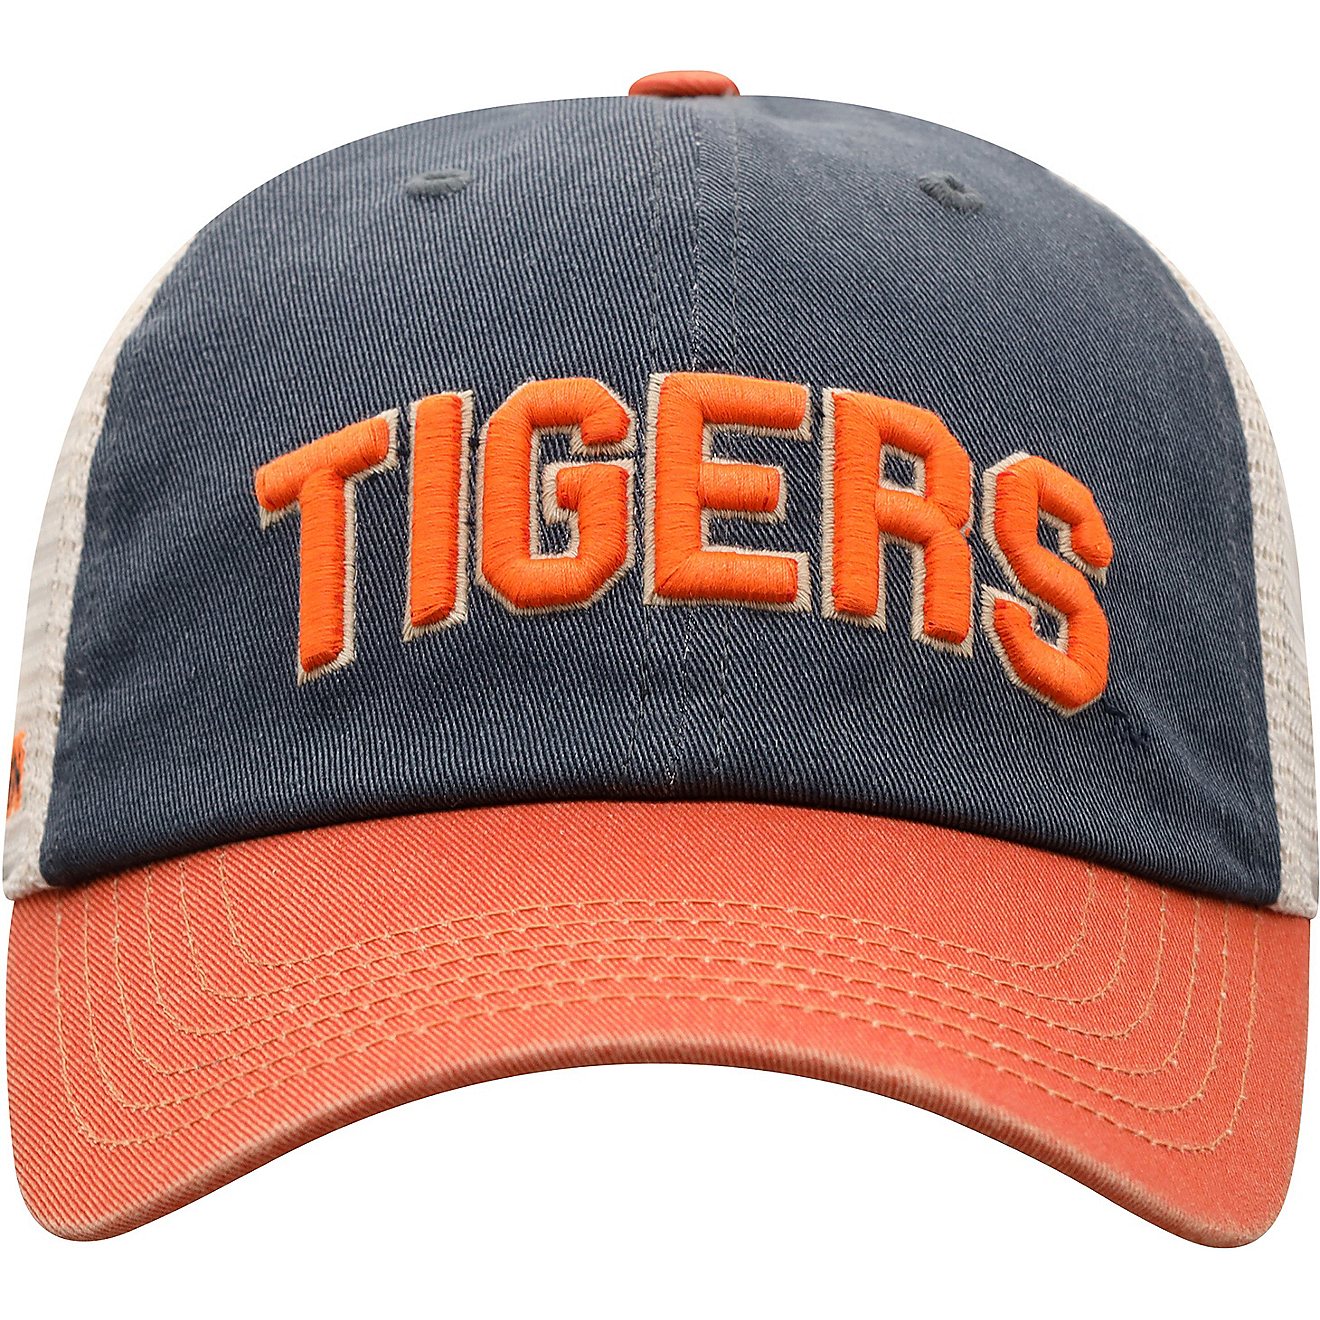 Top of the World Men's Auburn University Andy 3-Tone Cap                                                                         - view number 2